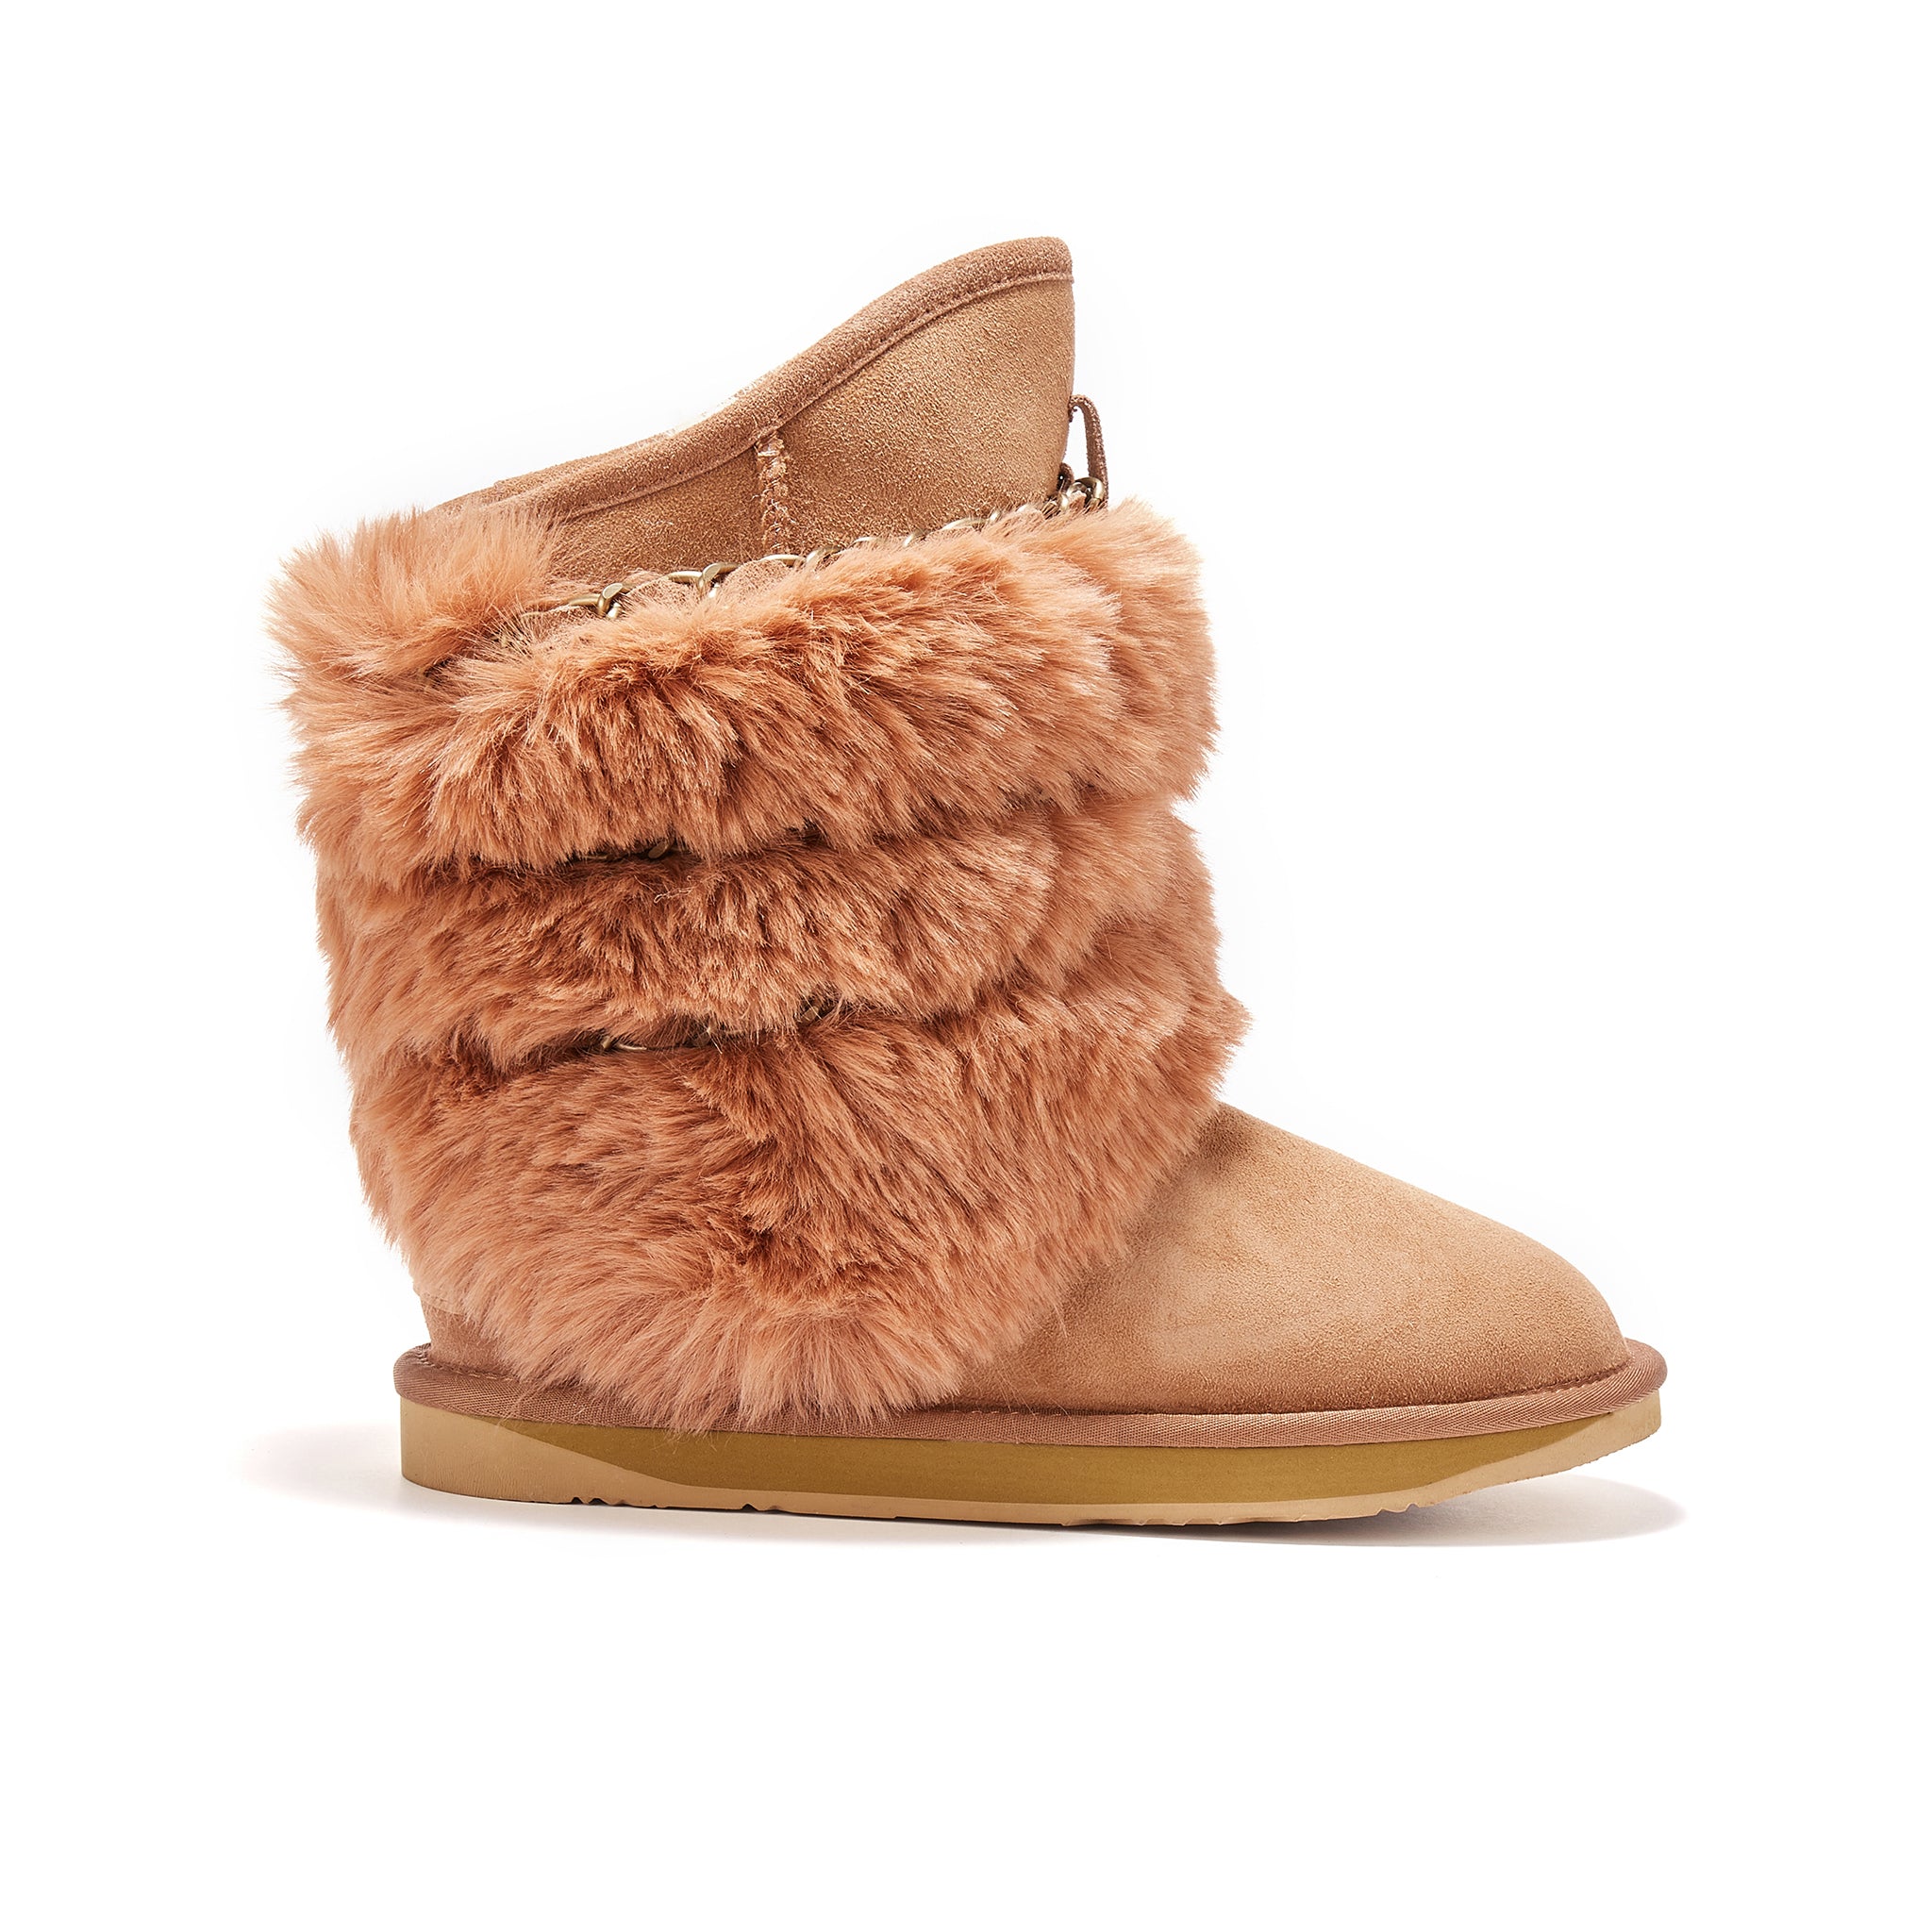 Australia Luxe Collective Cosy Shearling & Suede Tall Boots on SALE